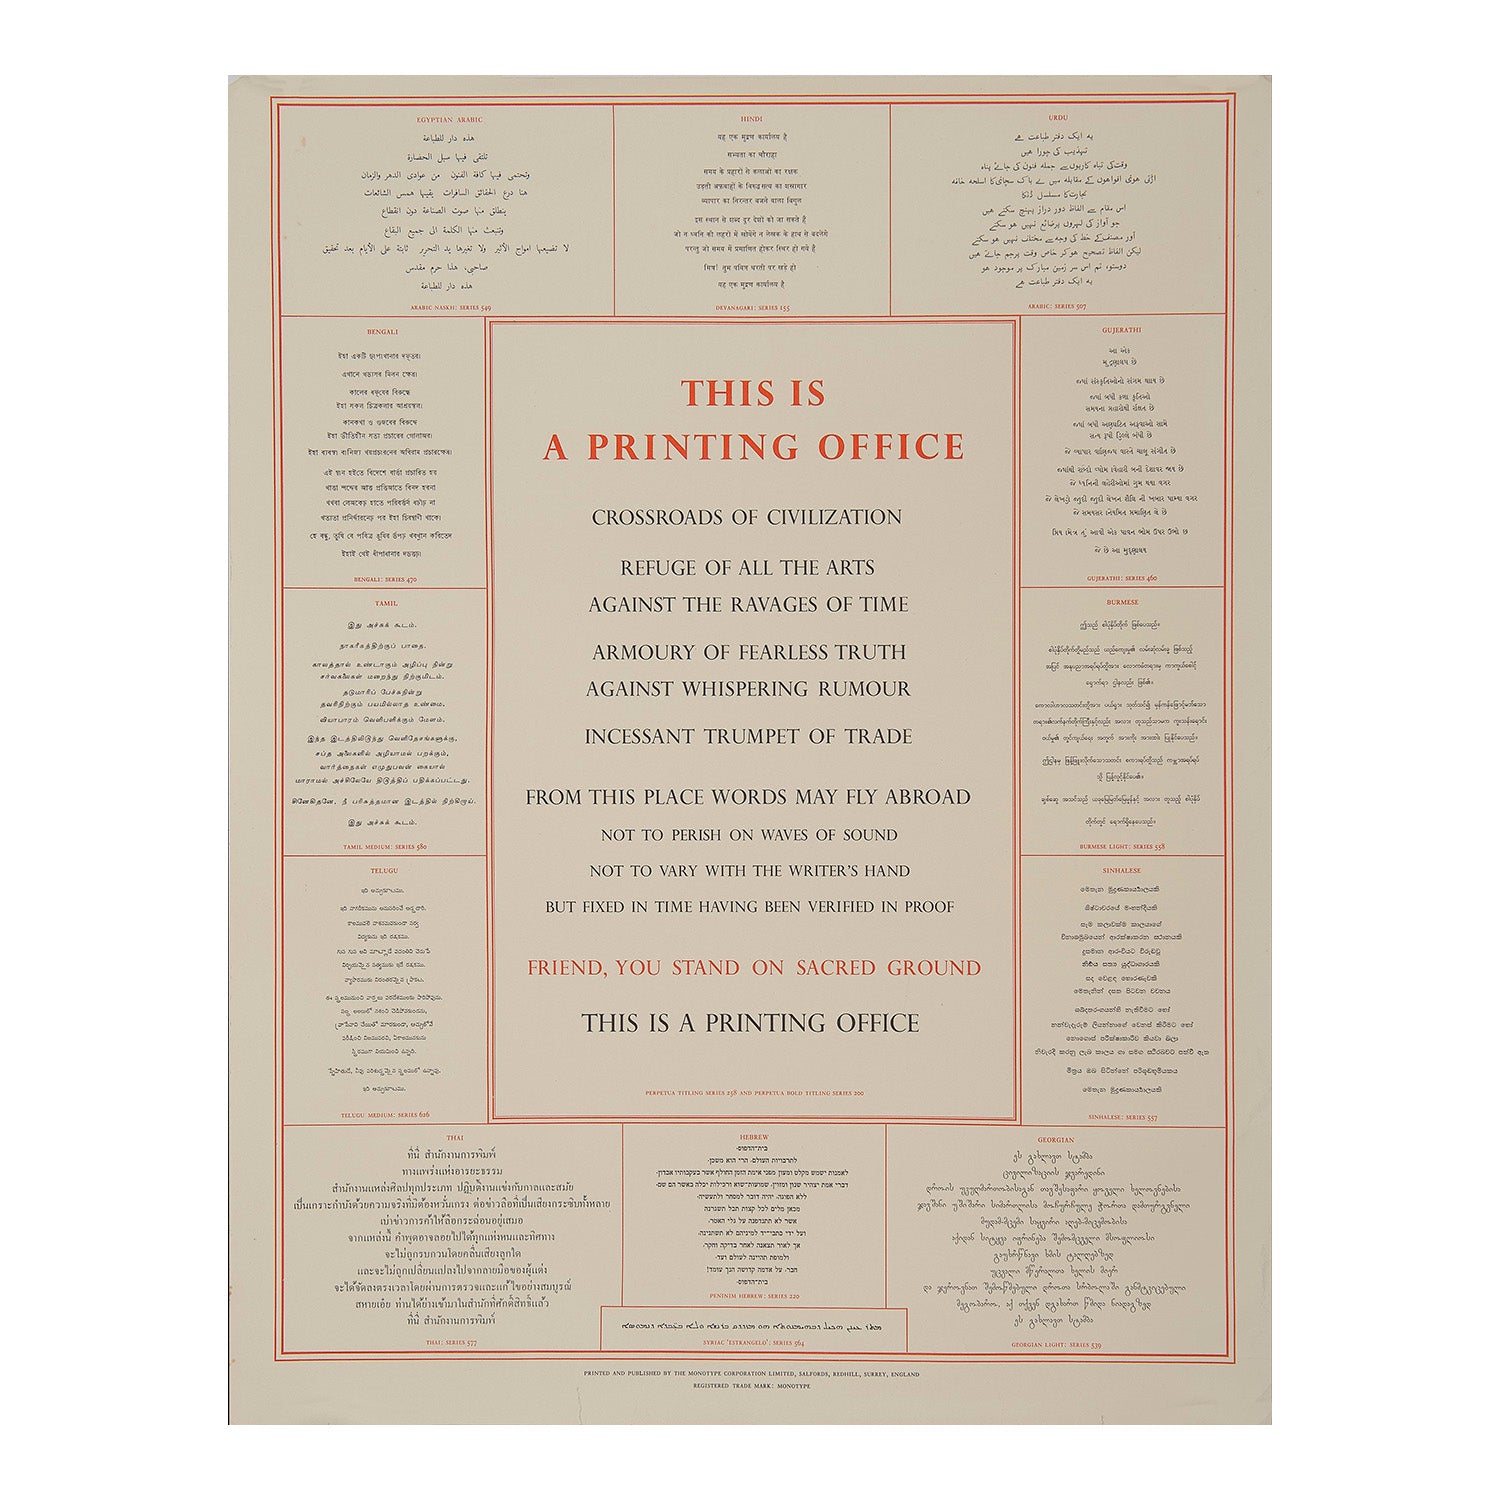 original poster, This is a Printing Office, printed and published by the Monotype Corporation Limited at the Curwen Press, c.1955. The poster features an inspirational quote from Beatrice Warde, a typographer and propagandist for fine printing, who worked for Monotype from 1927. The design also includes examples of Monotype typefaces in a number of languages, including Hindi, Thai, Tamil and Hebrew